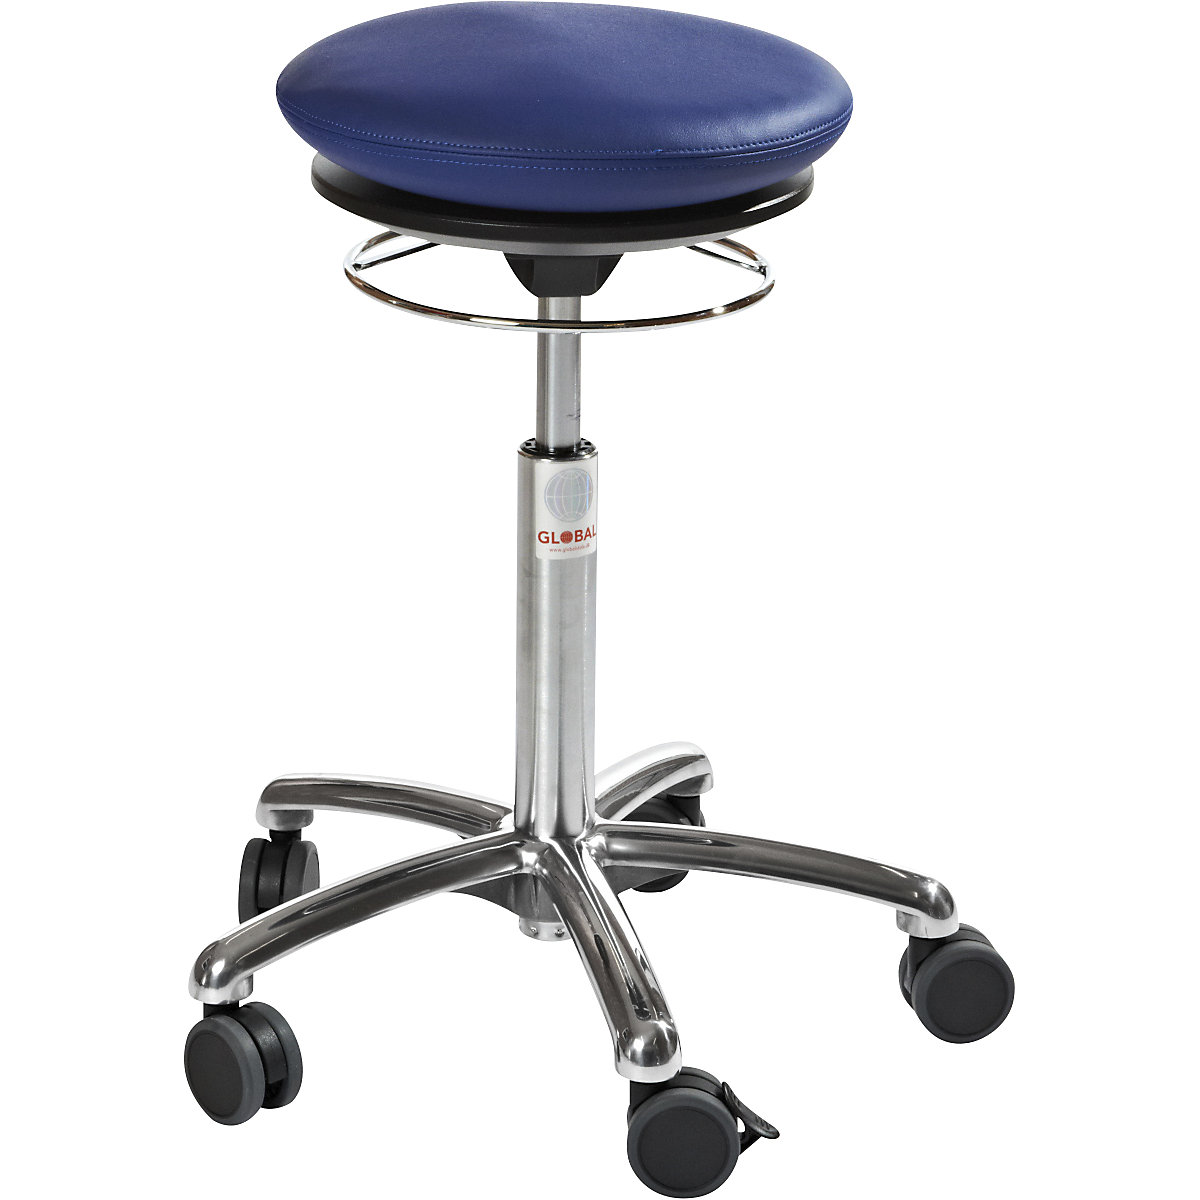 Stool with air cushion seat